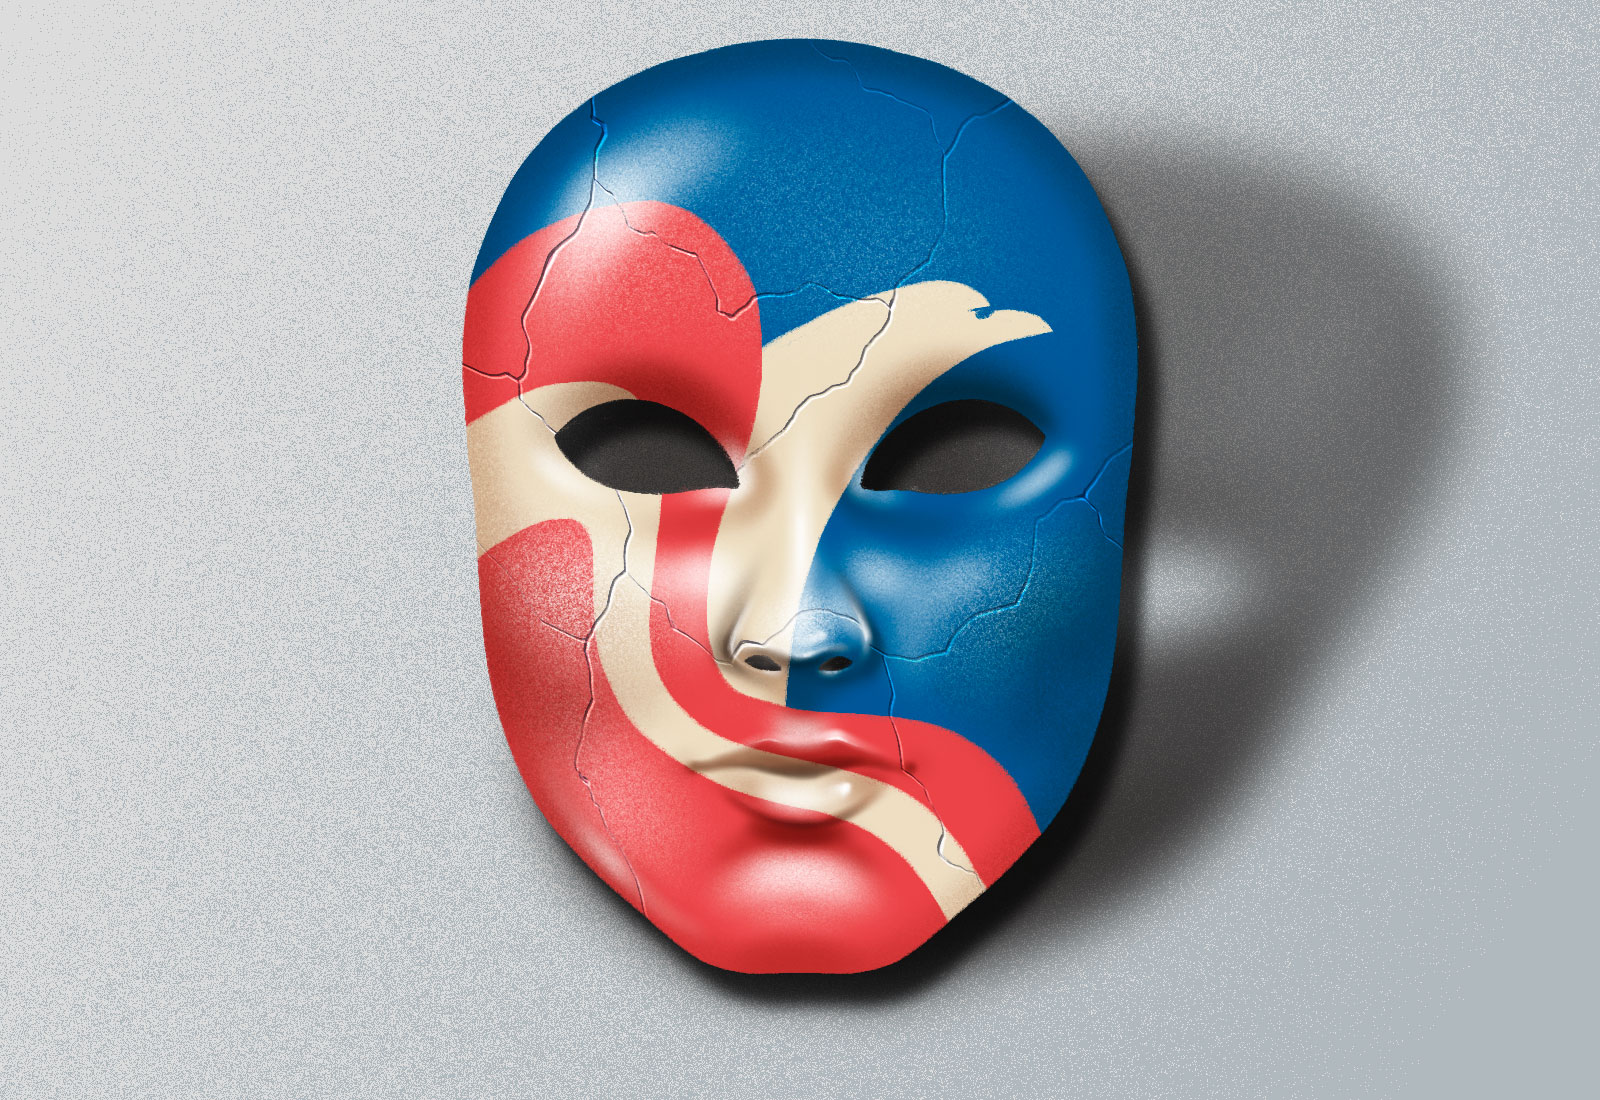 Illustration: A cracked Venetian mask with the Chamber of Commerce design on it